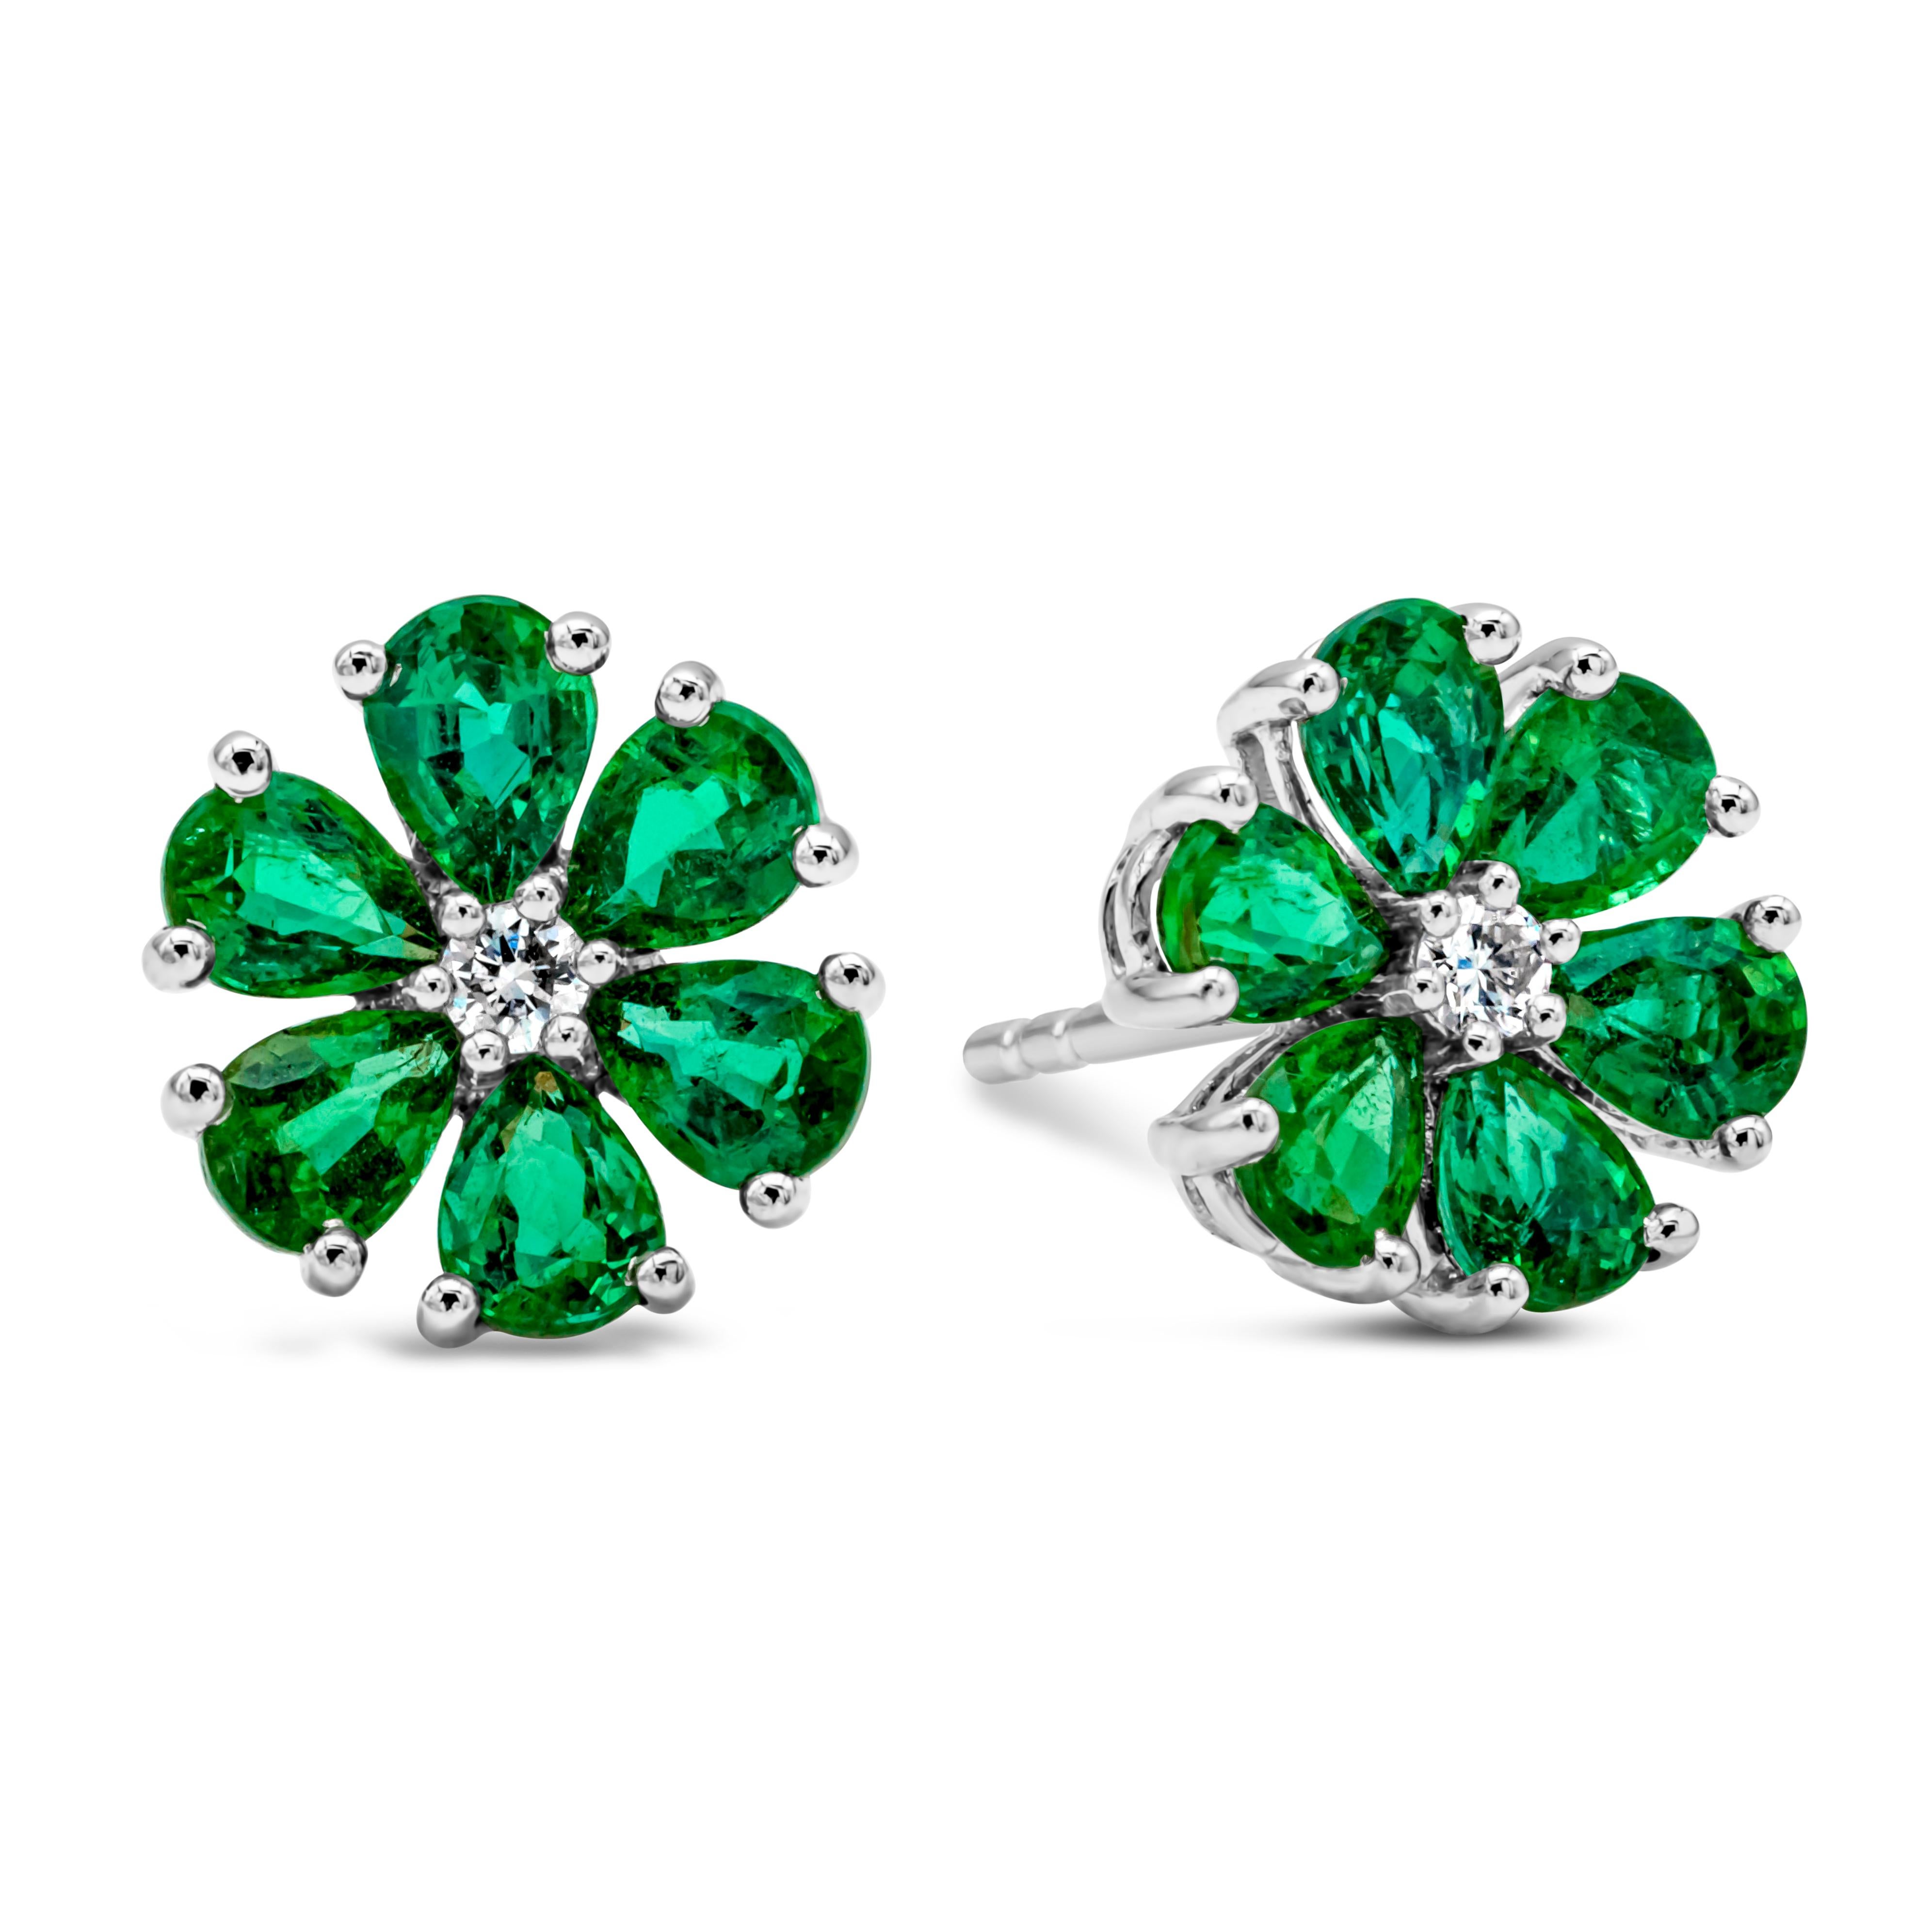 A very beautiful pair of stud earrings featuring a round shape brilliant diamond center weighing 0.07 carats total, F color, VS in clarity and set in a six prong basket setting. Accented with color-rich pear shape green emerald set in a floral-motif